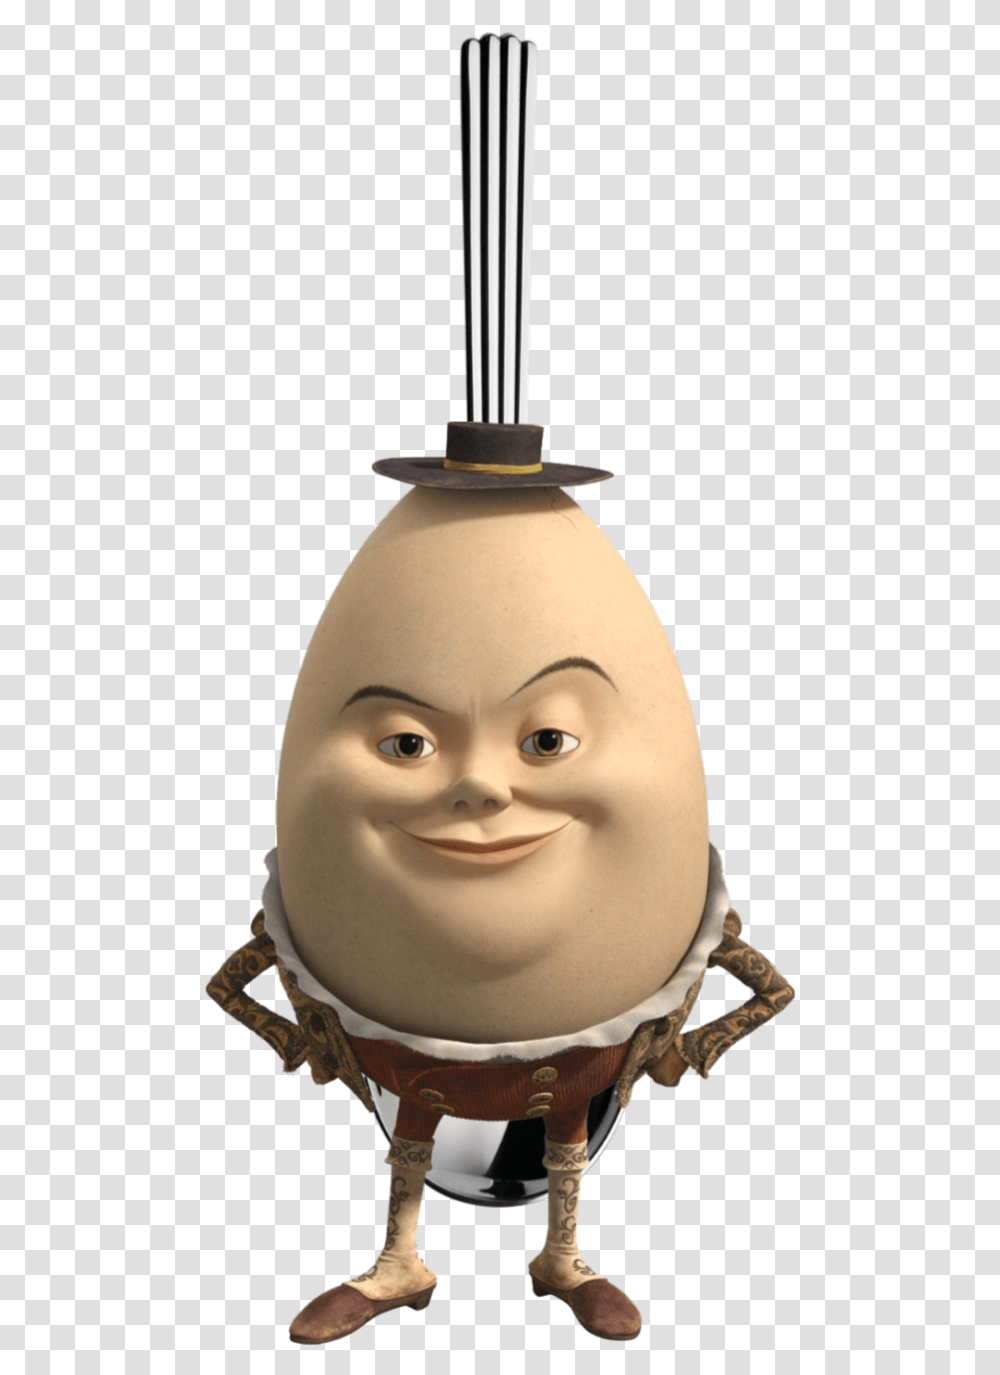 Top Ten Relay Games Humpty Dumpty, Head, Doll, Toy, Figurine Transparent Png